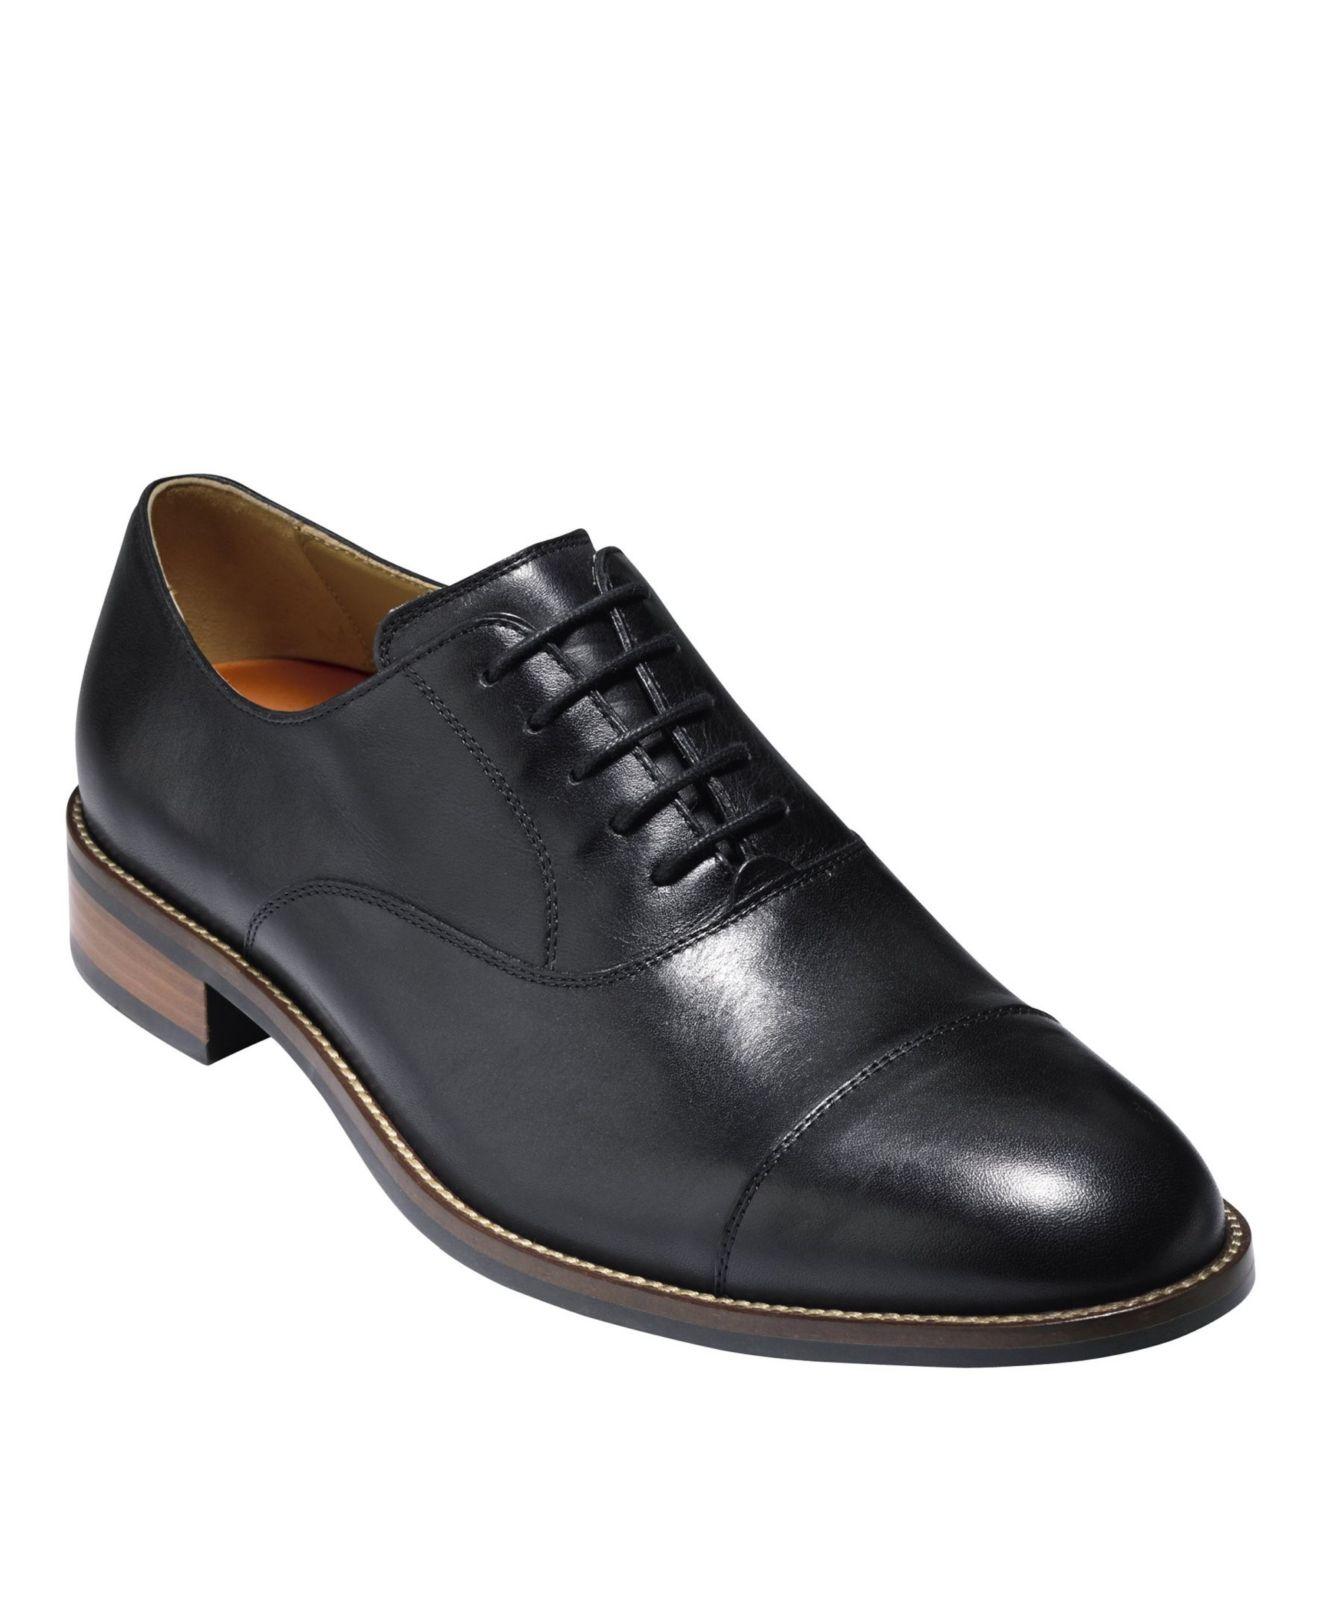 Cole Haan Leather Lenox Hill Cap Oxford in Black for Men - Lyst